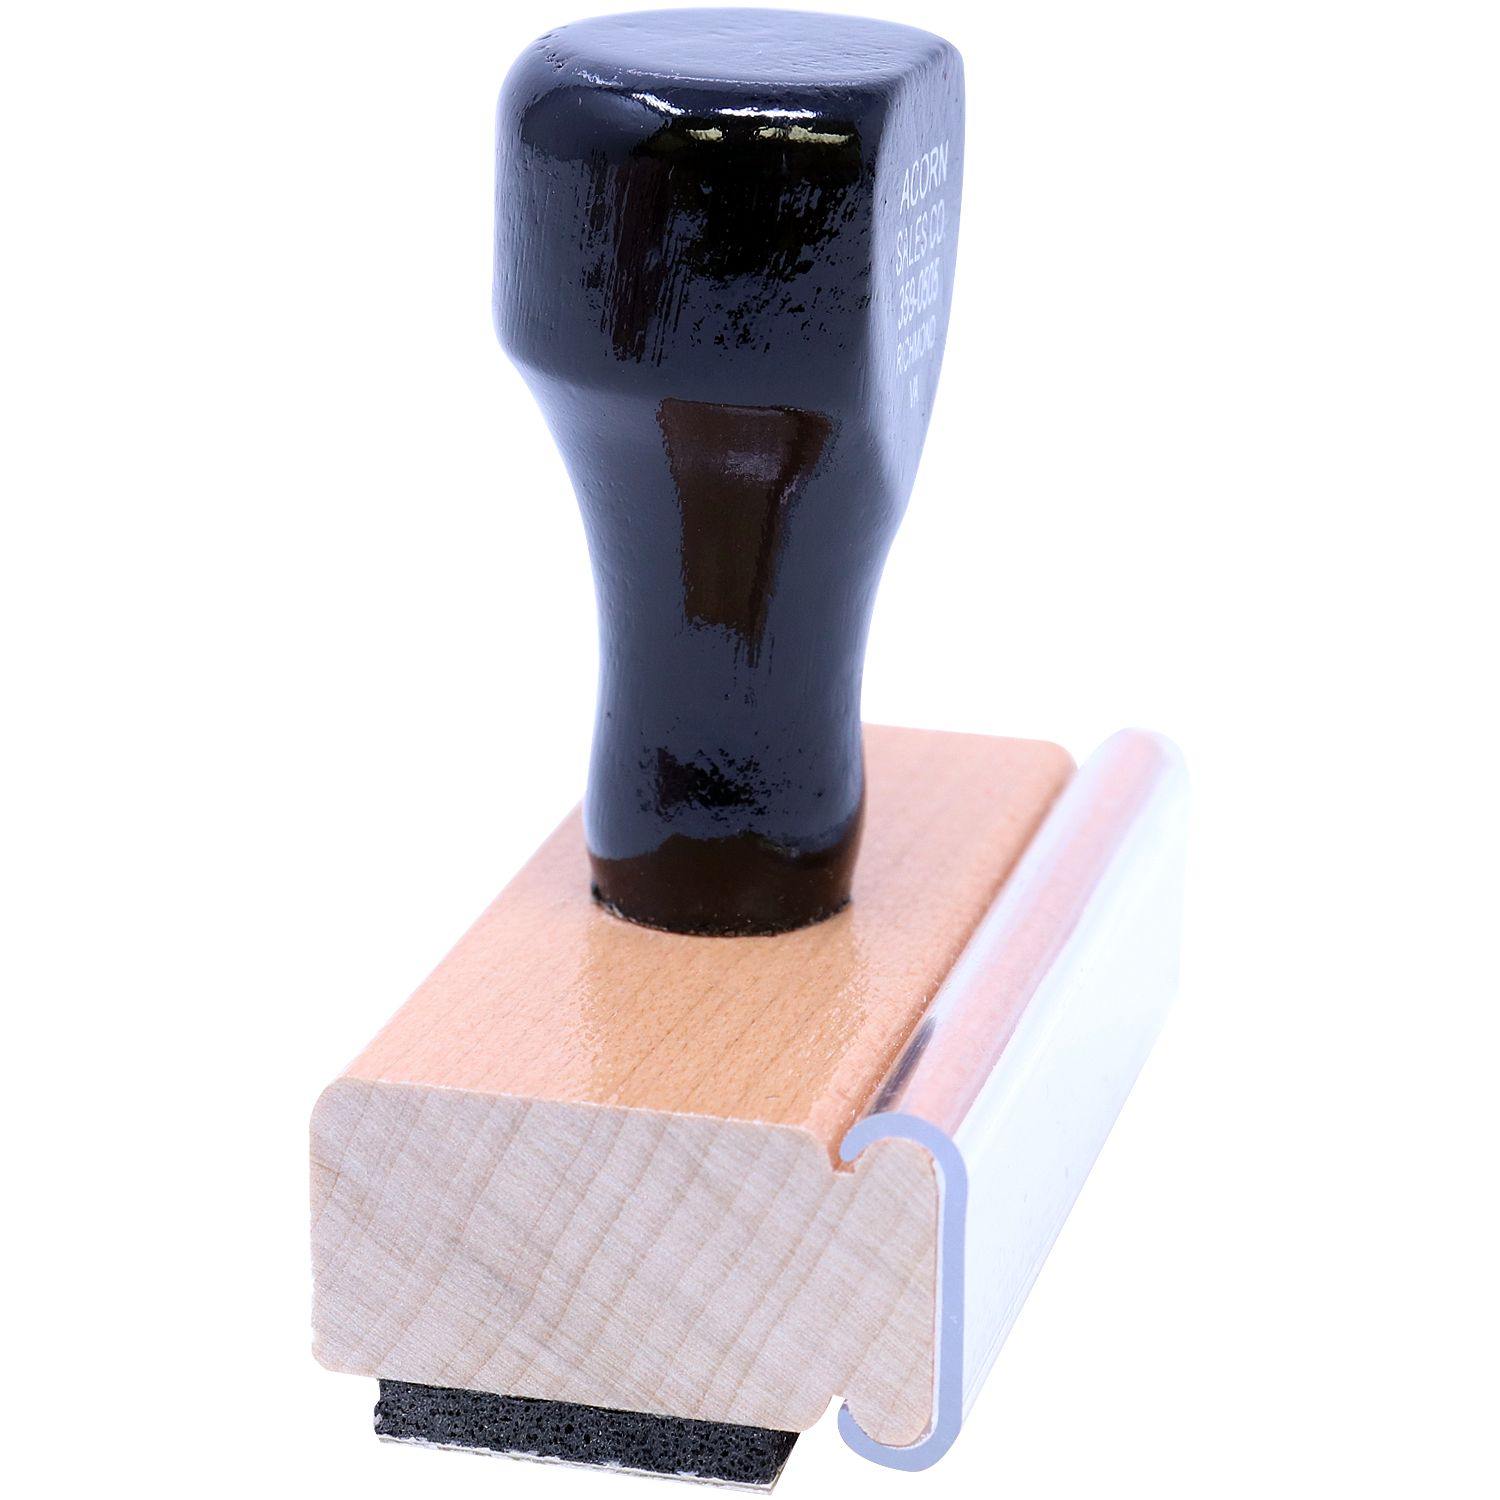 Side View of Large Notice Of Action Rubber Stamp at an Angle